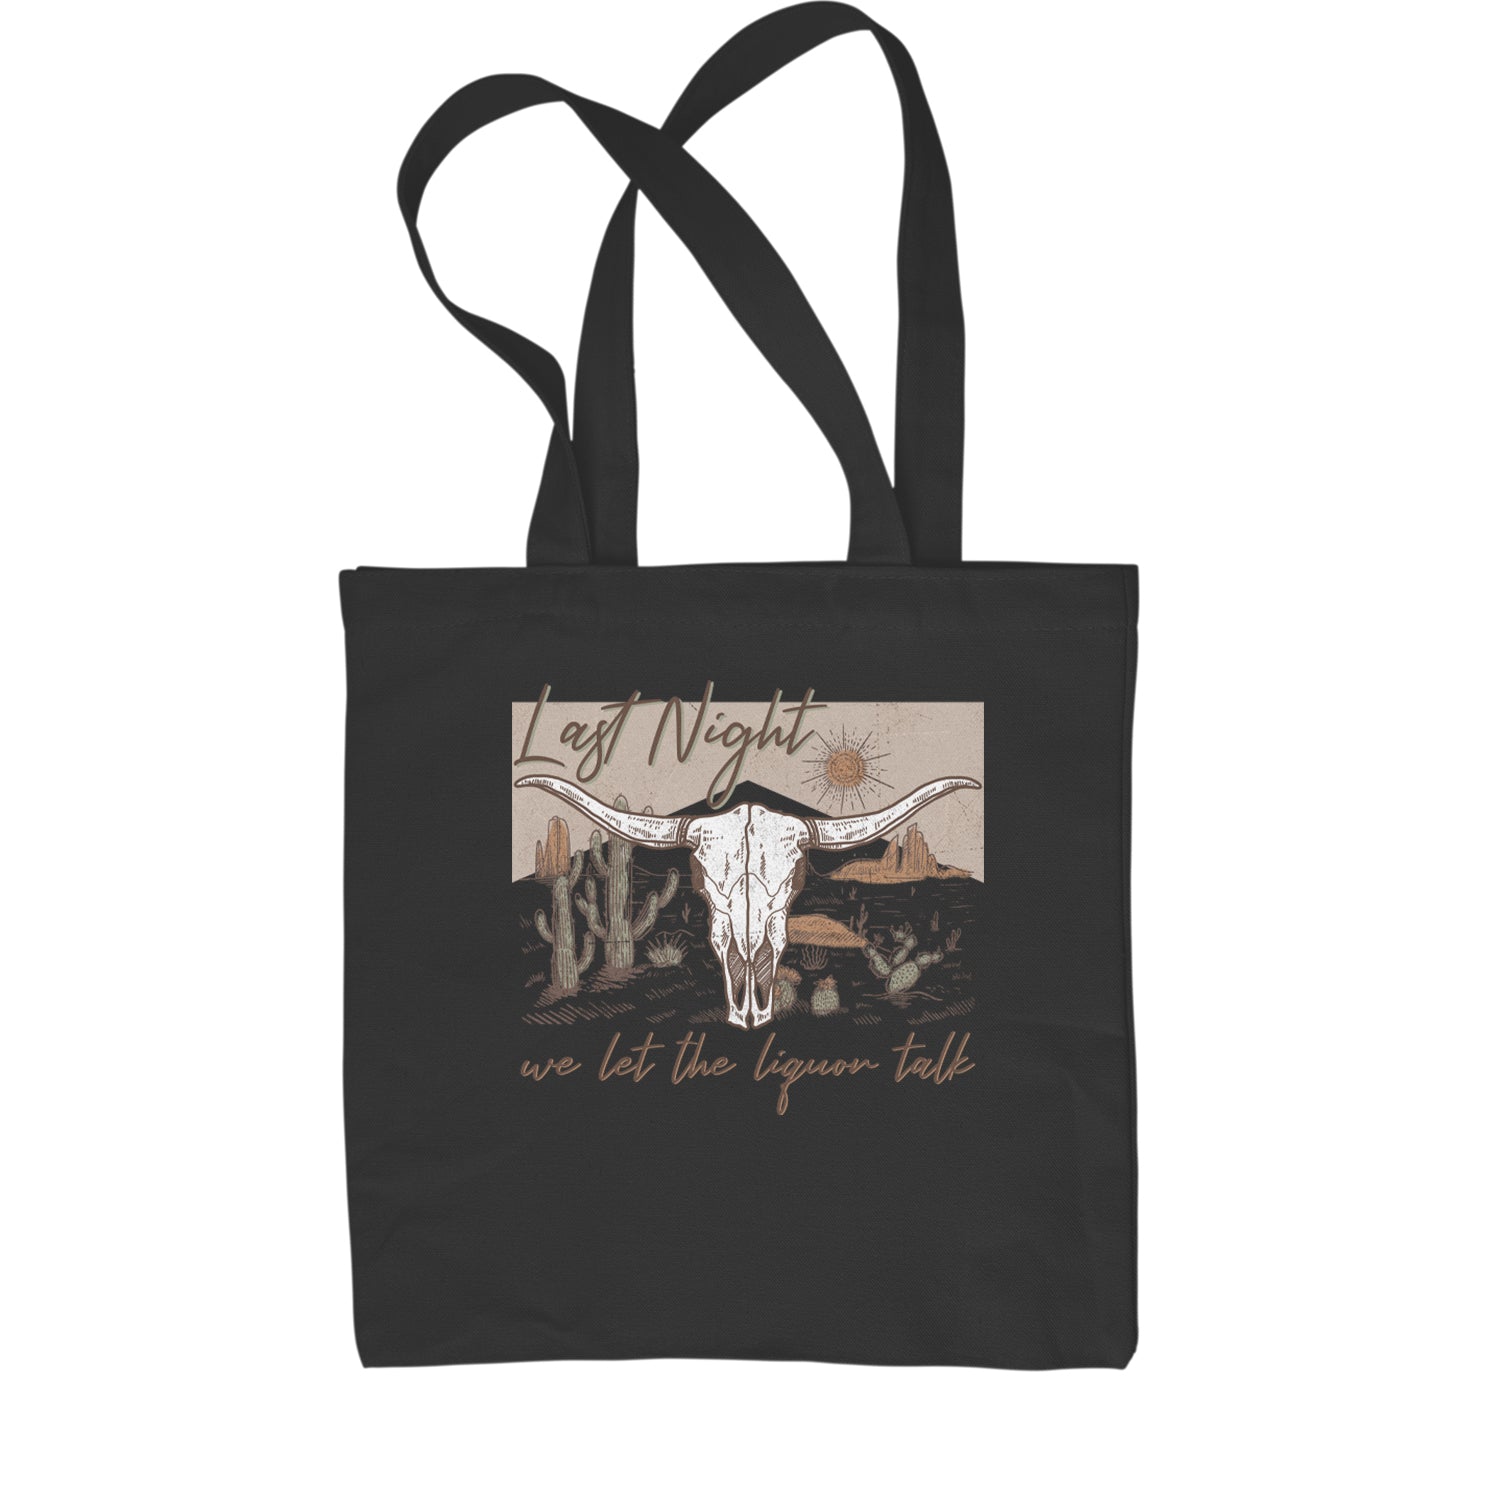 Last Night We Let The Liquor Talk Country Music Western Shopping Tote Bag